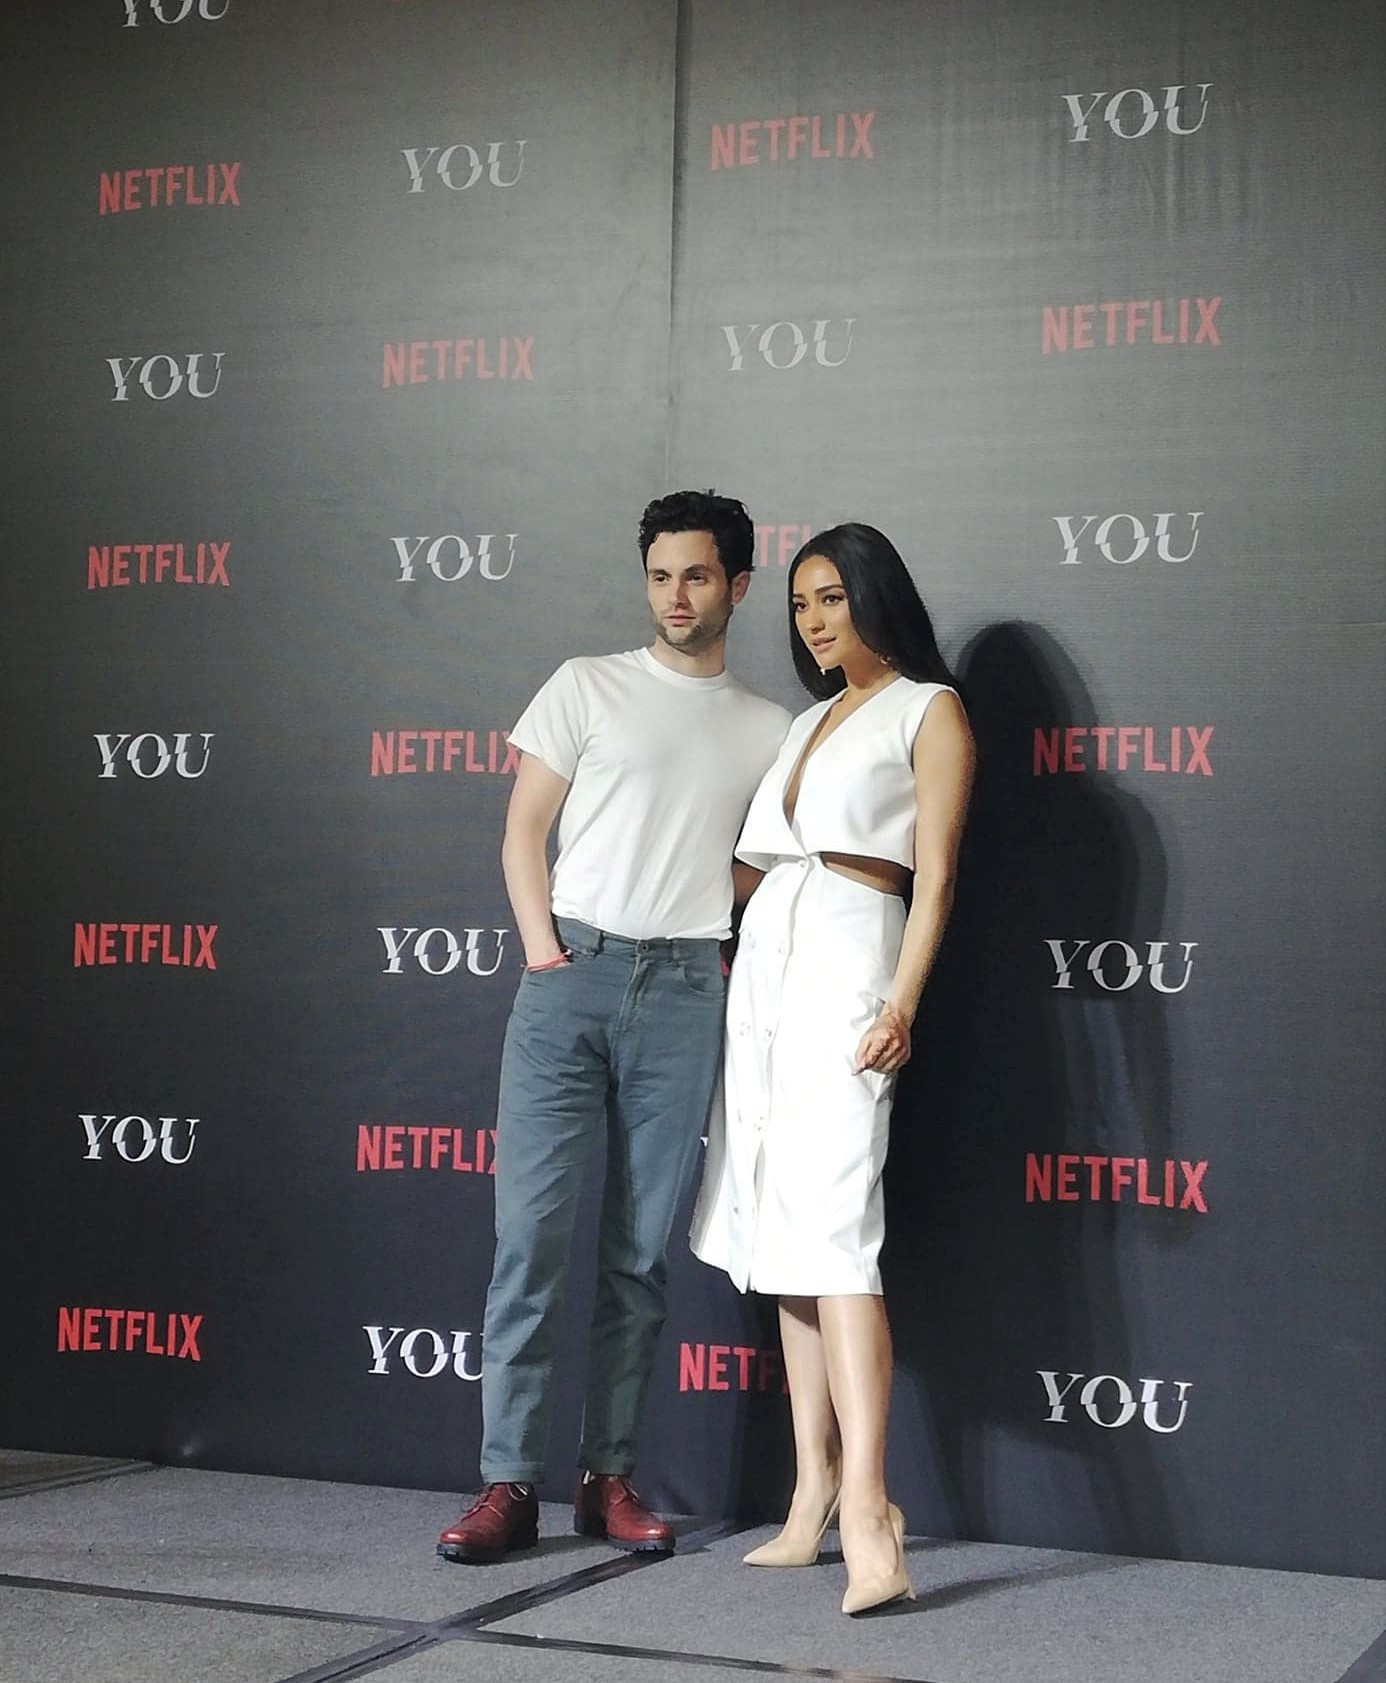 Penn Badgley and Shay Mitchell of Netflix Original series, "YOU" pose for photos after their exclusive sit-down panel, "In Conversation with YOU" at The Peninsula Manila on January 14, 2019